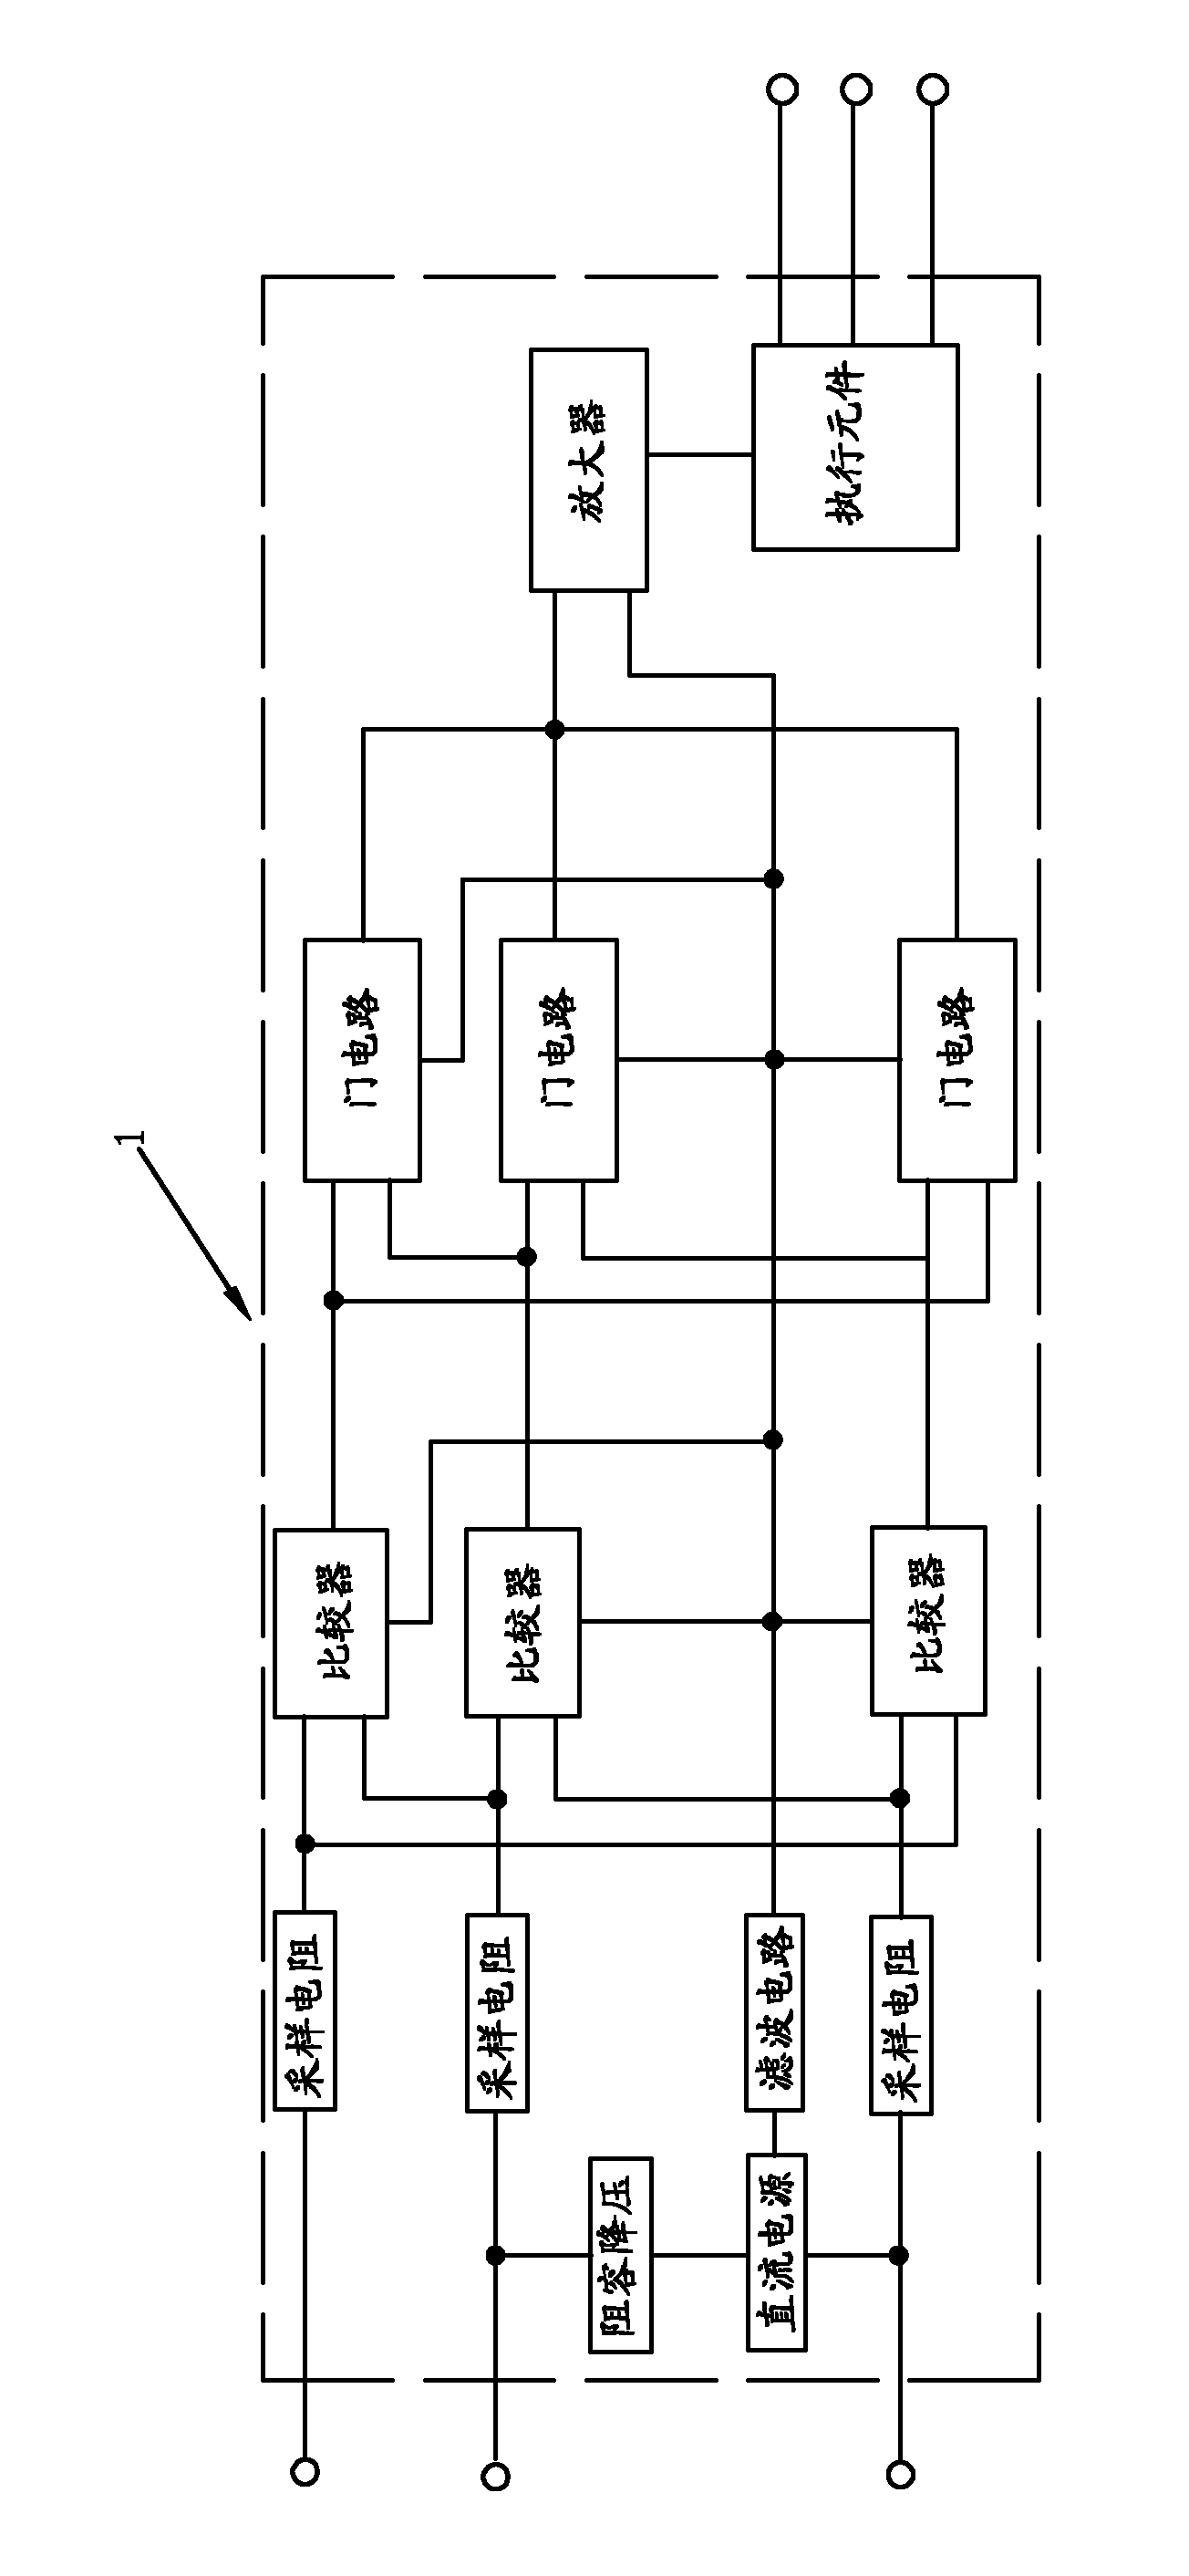 Thyristor pressure regulator with phase sequence protection